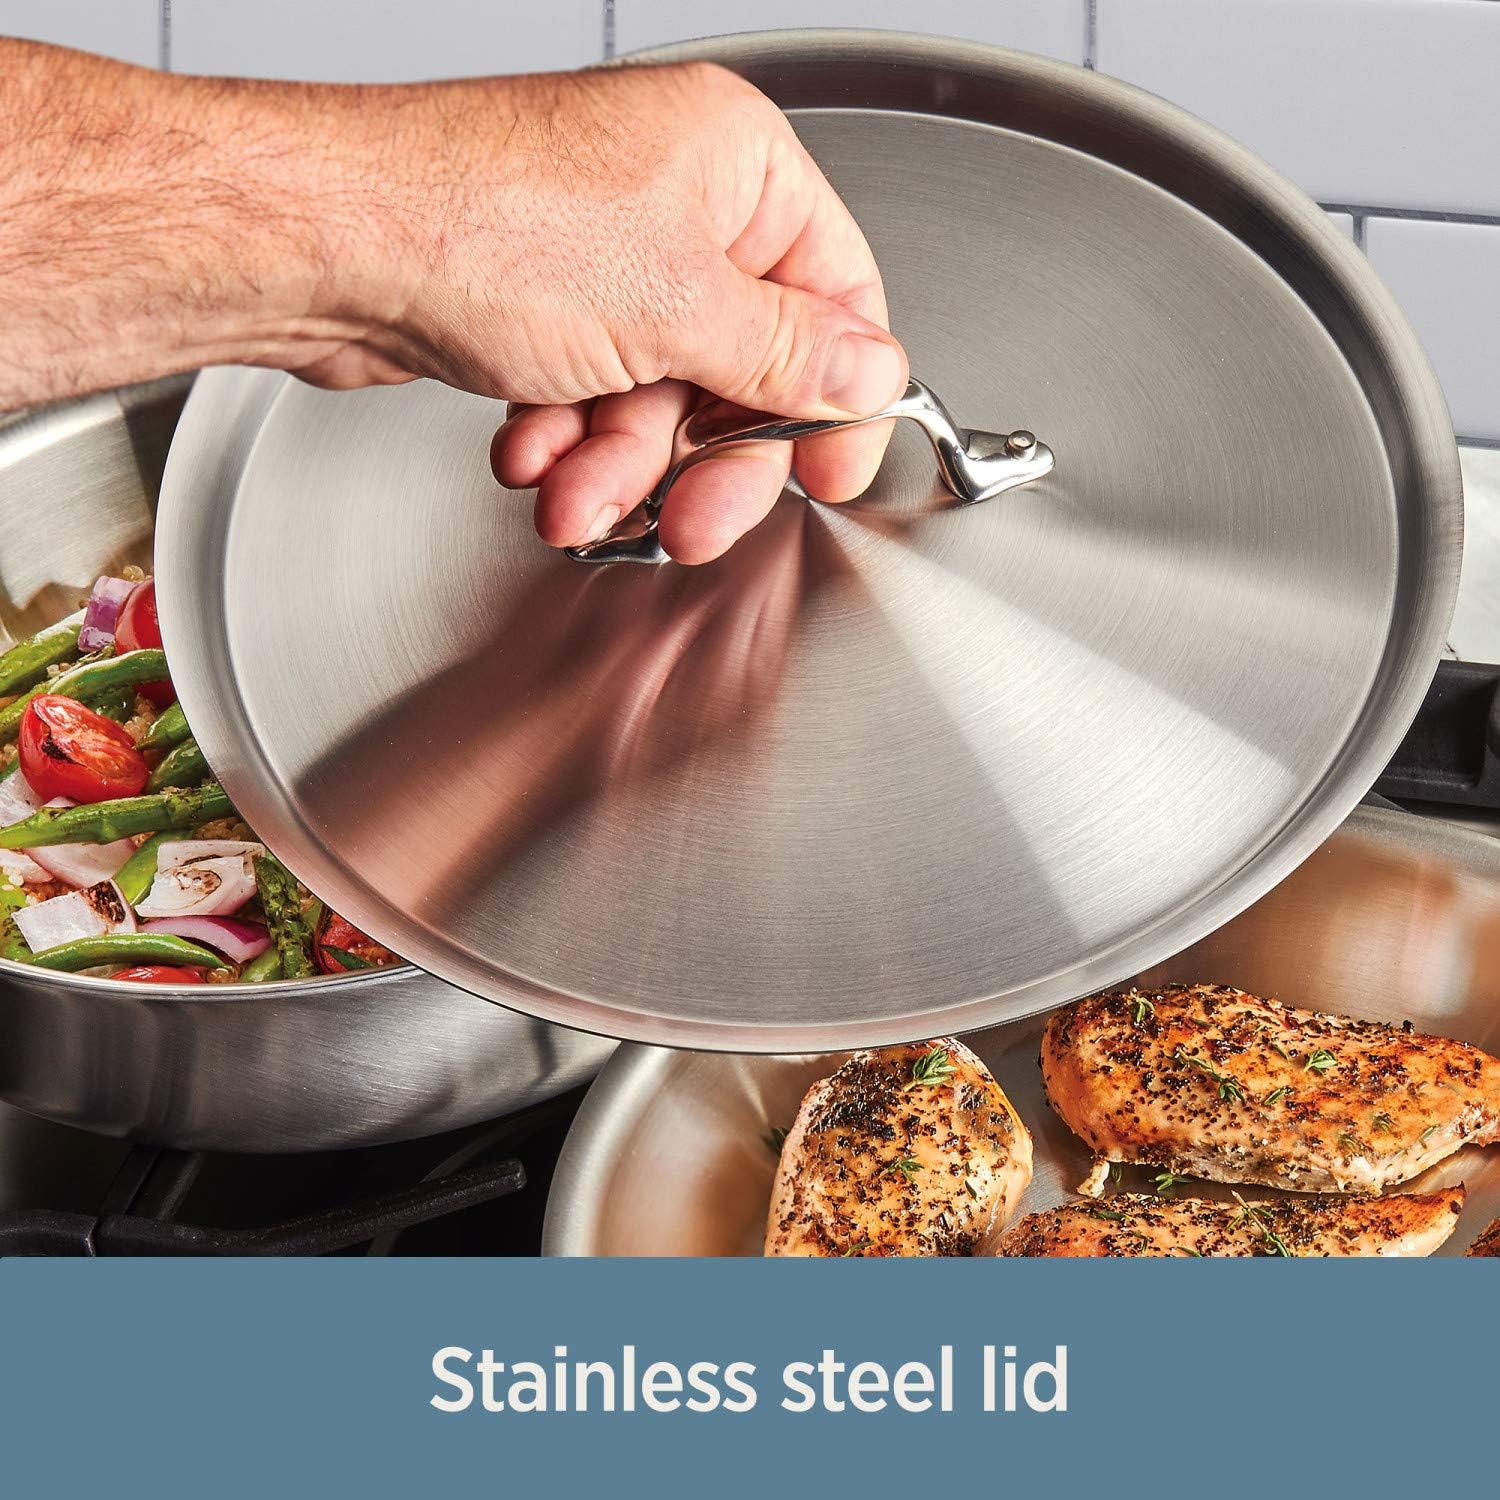 All-Clad 4201 Stainless Steel Tri-Ply Bonded Sauce Pan with Lid